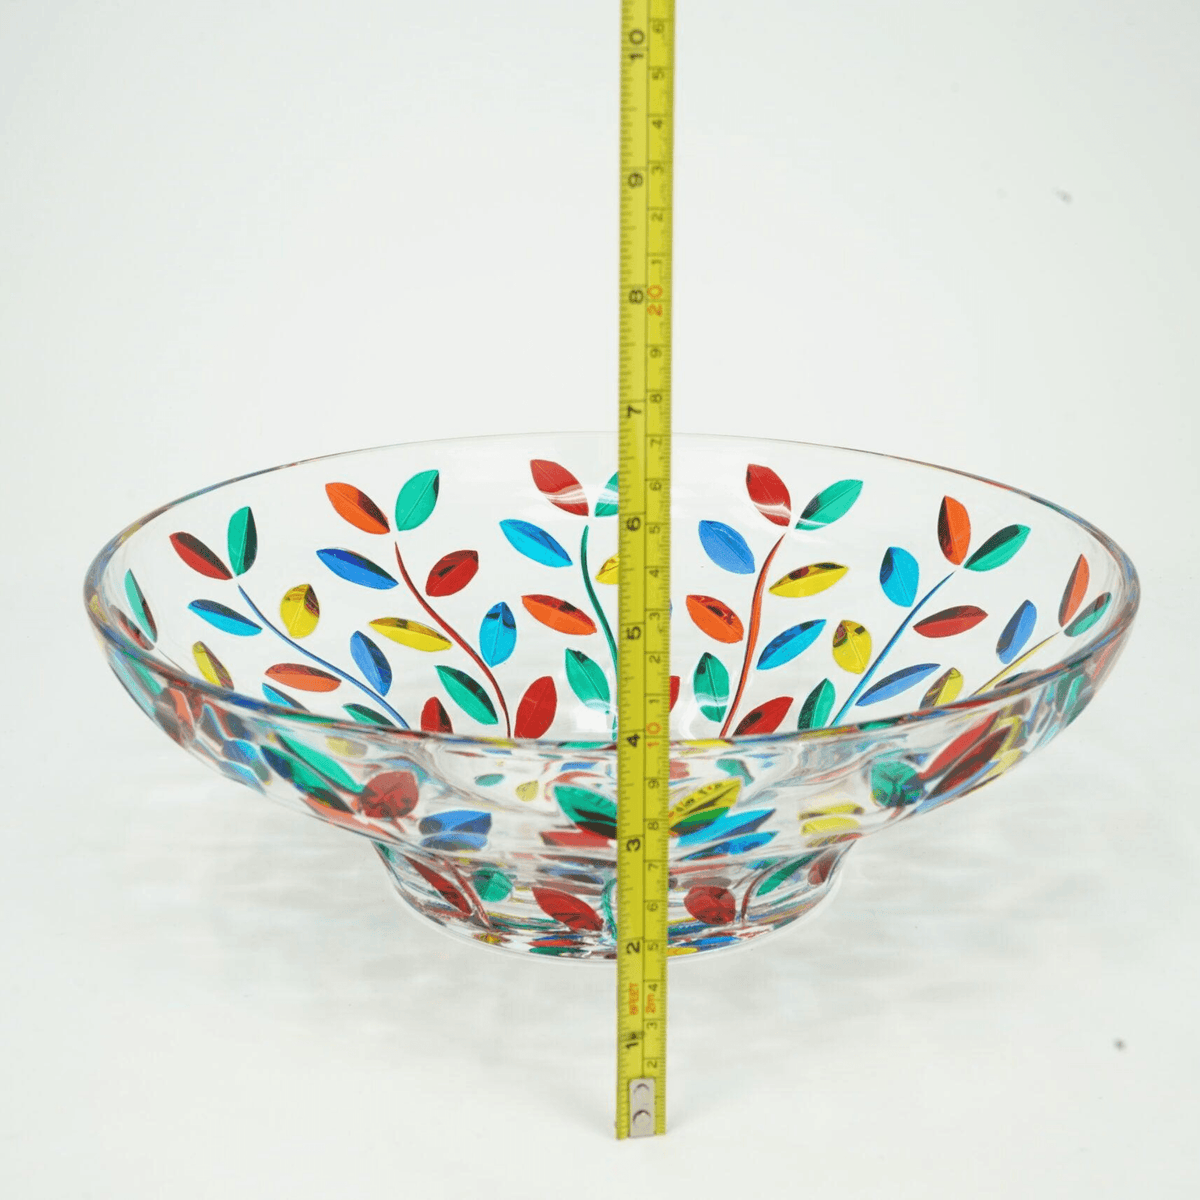 Flowervine Decorative Glass Centerpiece Bowl, Hand Painted, Made In Italy at MyItalianDecor